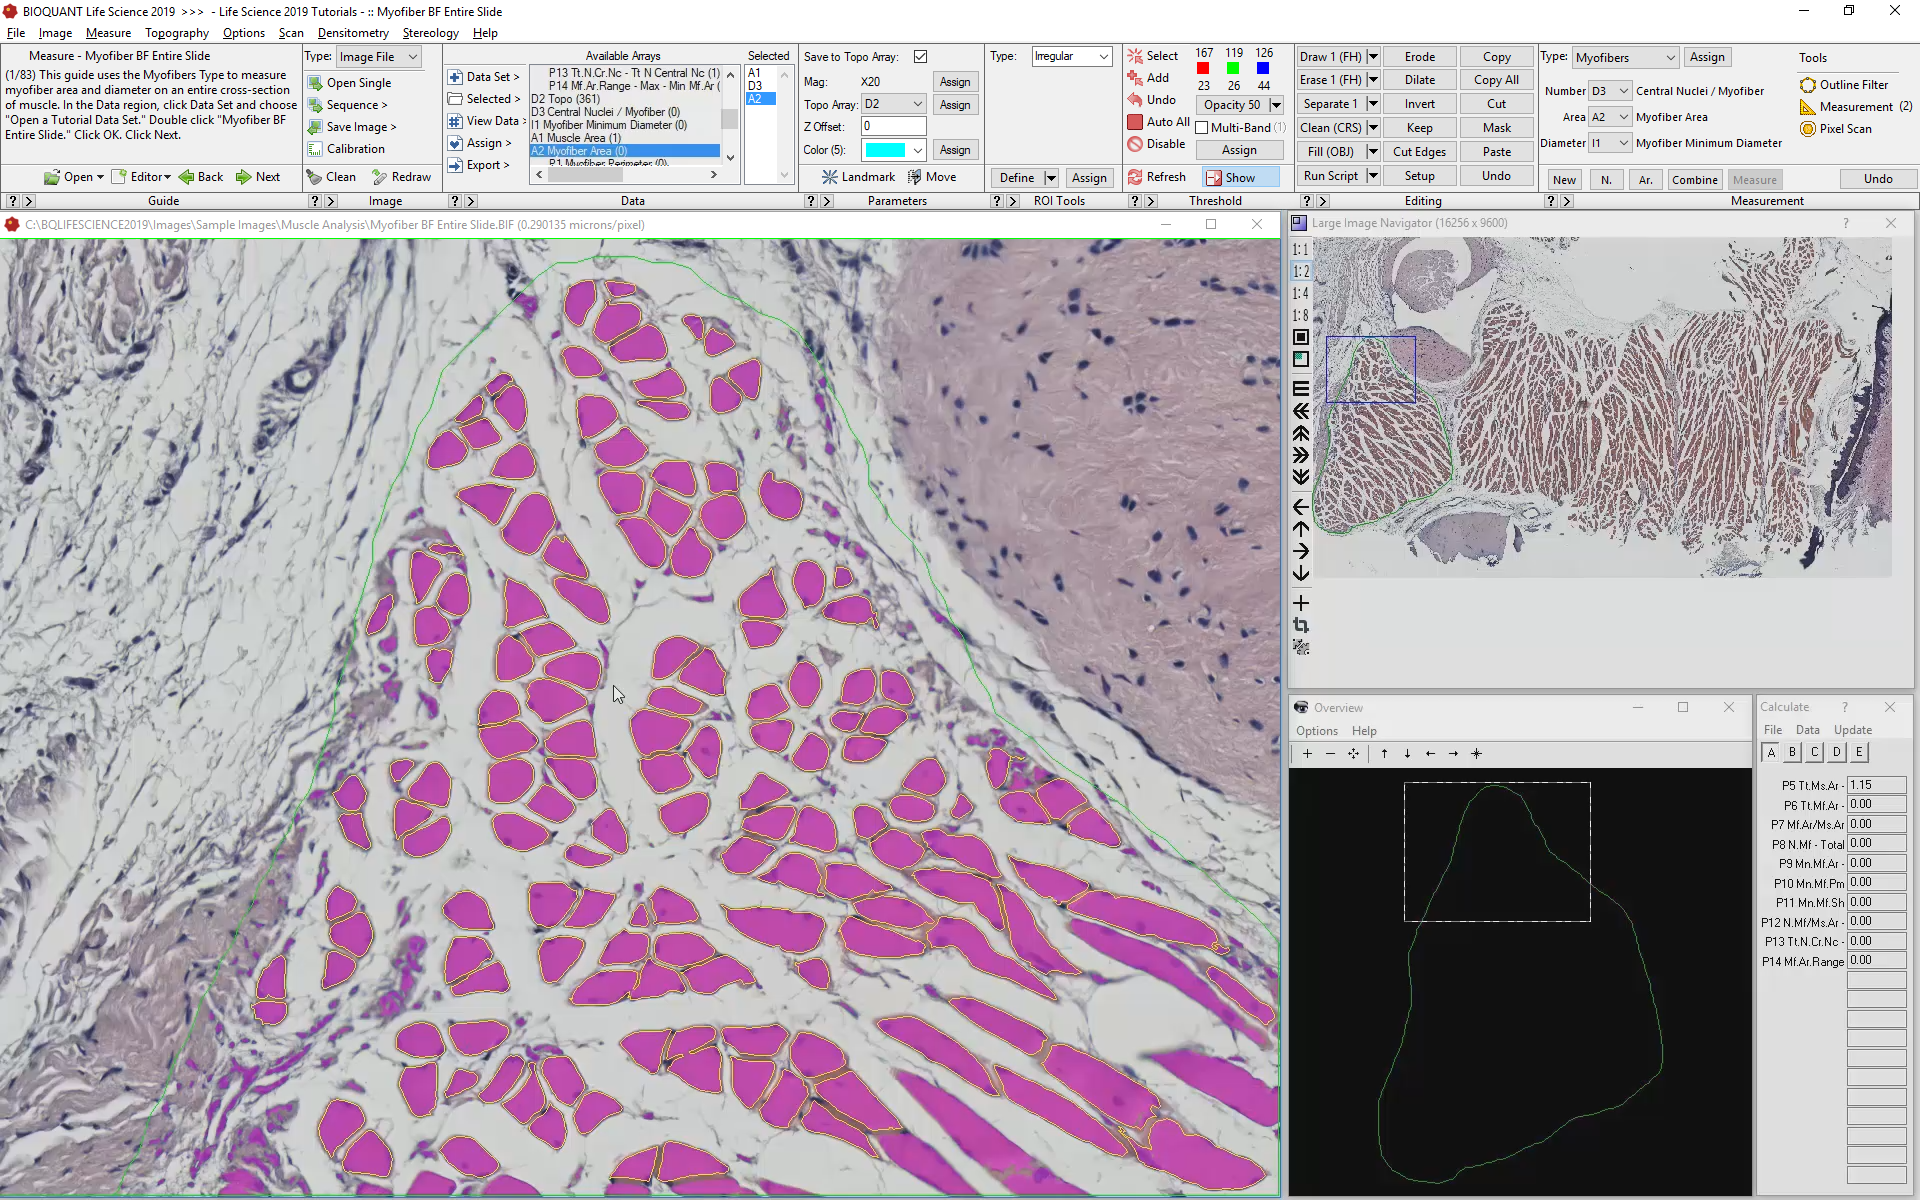 Use Specific Staining to Identify Cells and Nuclei